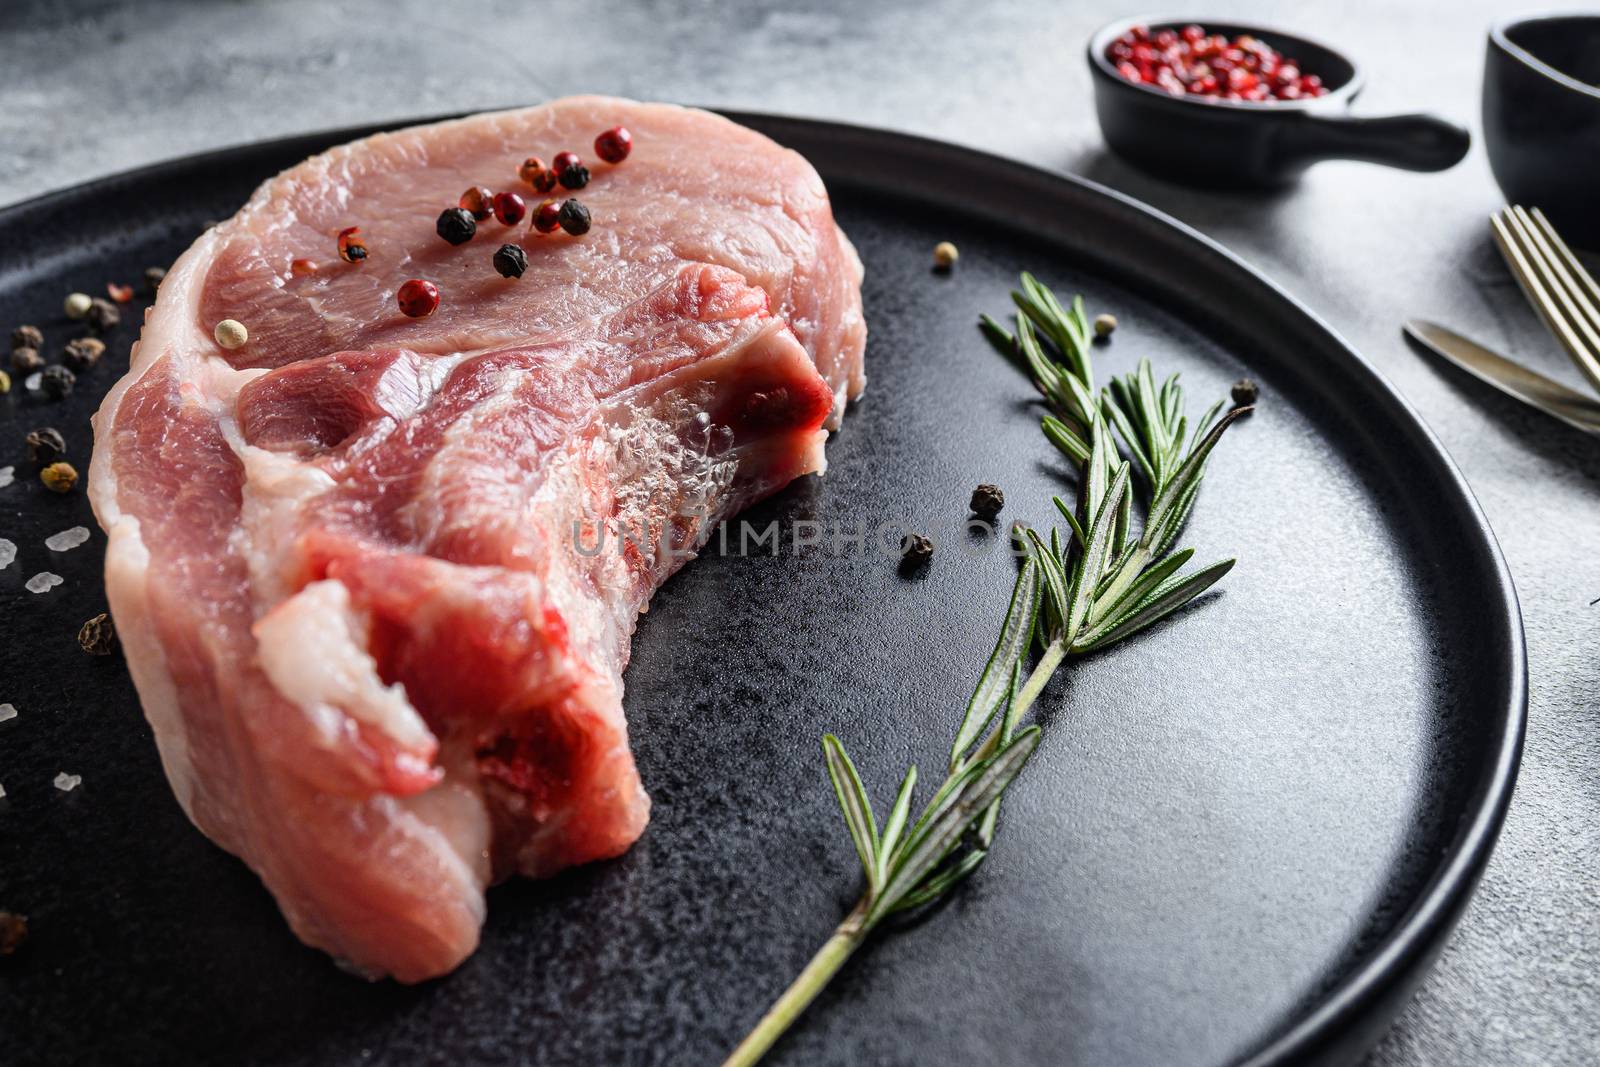 Raw Pork Loin chops in a black round plate on a grey textured stone background with rosemary garlic peppercorns ingredients for grill close up selective focus new wide angel by Ilianesolenyi